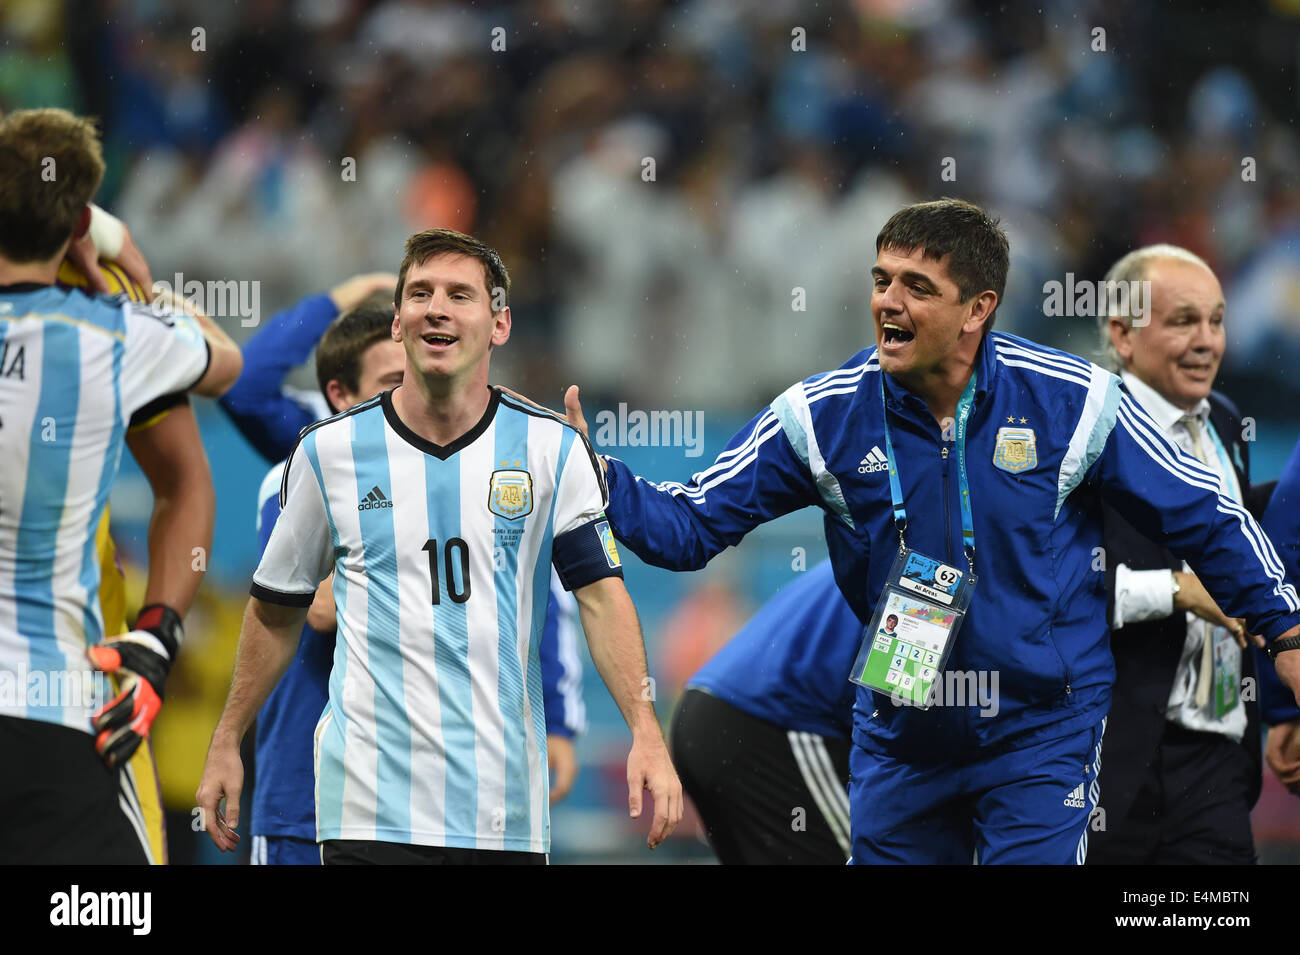 Sao Paulo, Brazil. 9th July, 2014. (L-R) Lionel Messi, Juan Jose Romero (ARG) Football/Soccer : Lionel Messi of Argentina celebrates with goalkeeper coach Juan Jose Romero after winning the FIFA World Cup Brazil 2014 Semi-finals match between Netherlands 0(2-4)0 Argentina at Arena de Sao Paulo in Sao Paulo, Brazil . © FAR EAST PRESS/AFLO/Alamy Live News Stock Photo